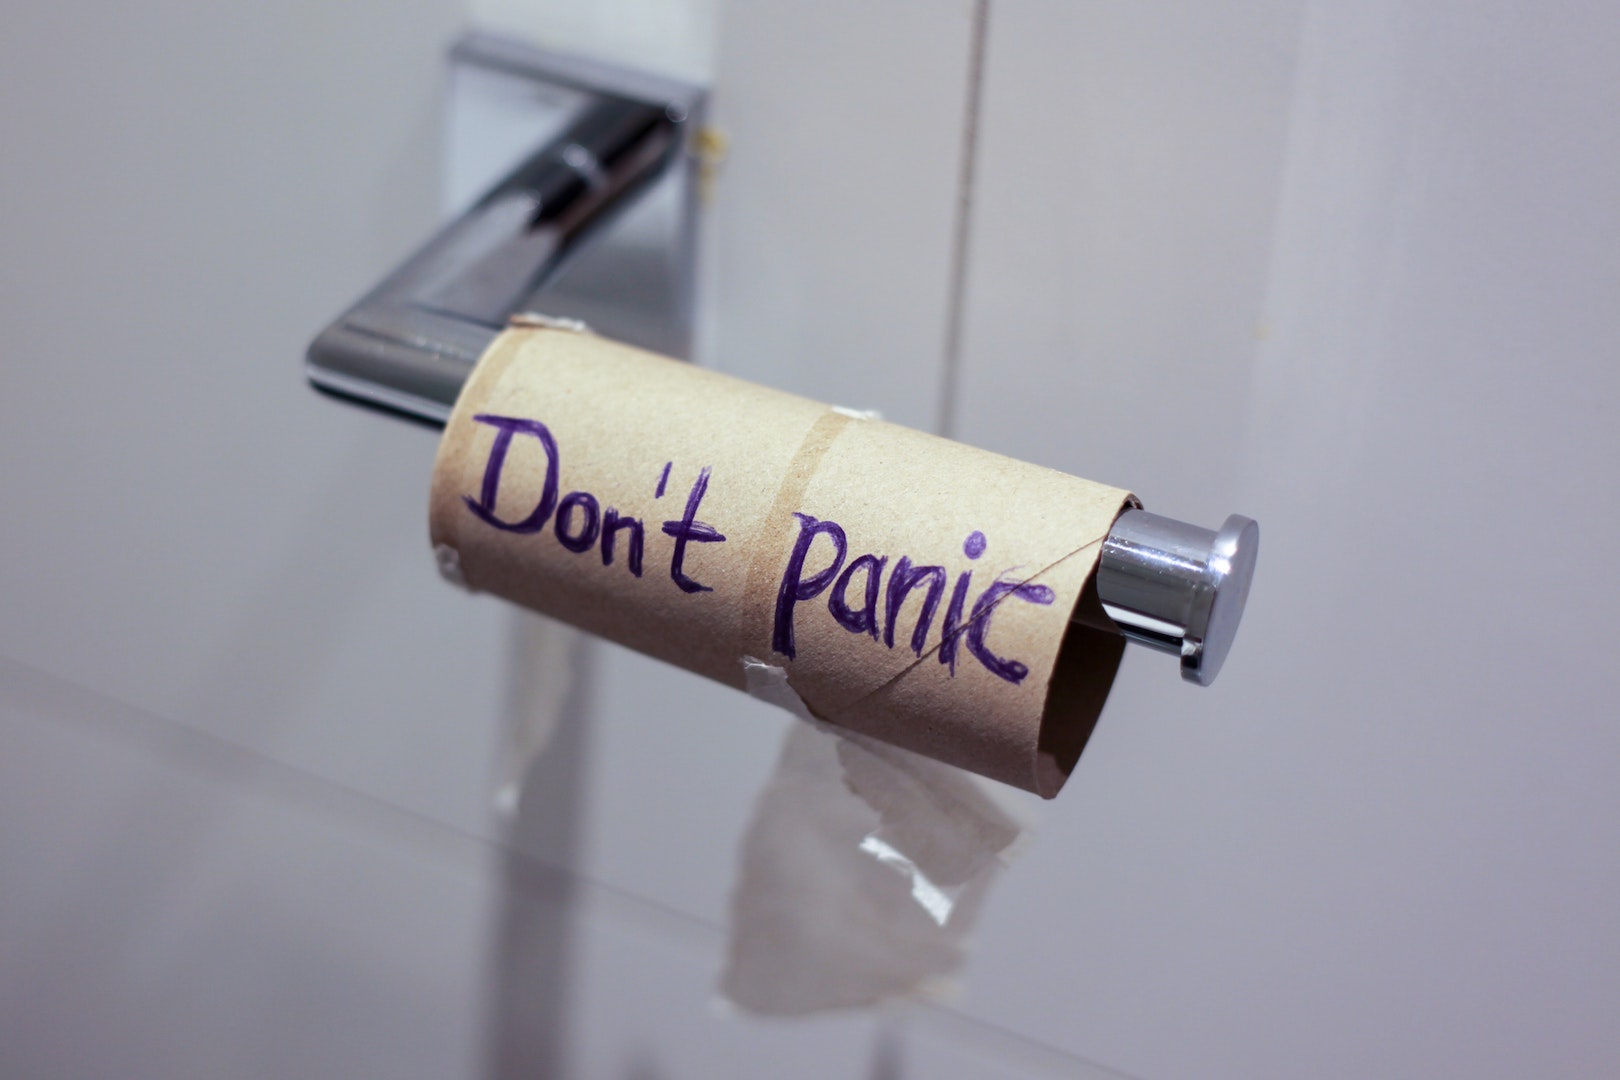 Photo of empty toilet roll with don't panic written on it.